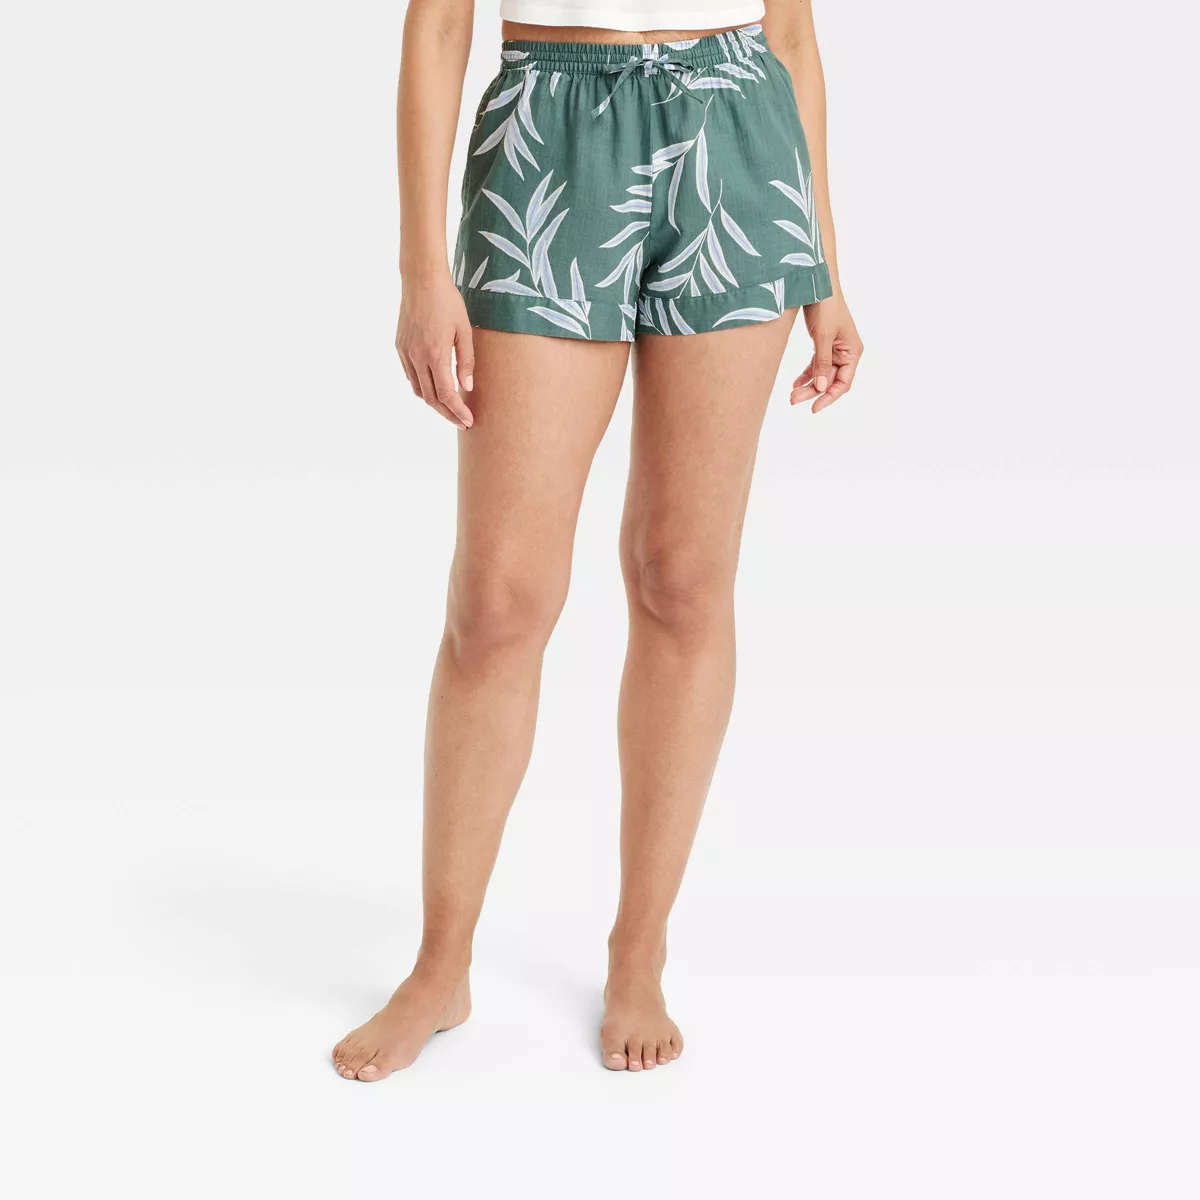 a model wearing the shorts in green